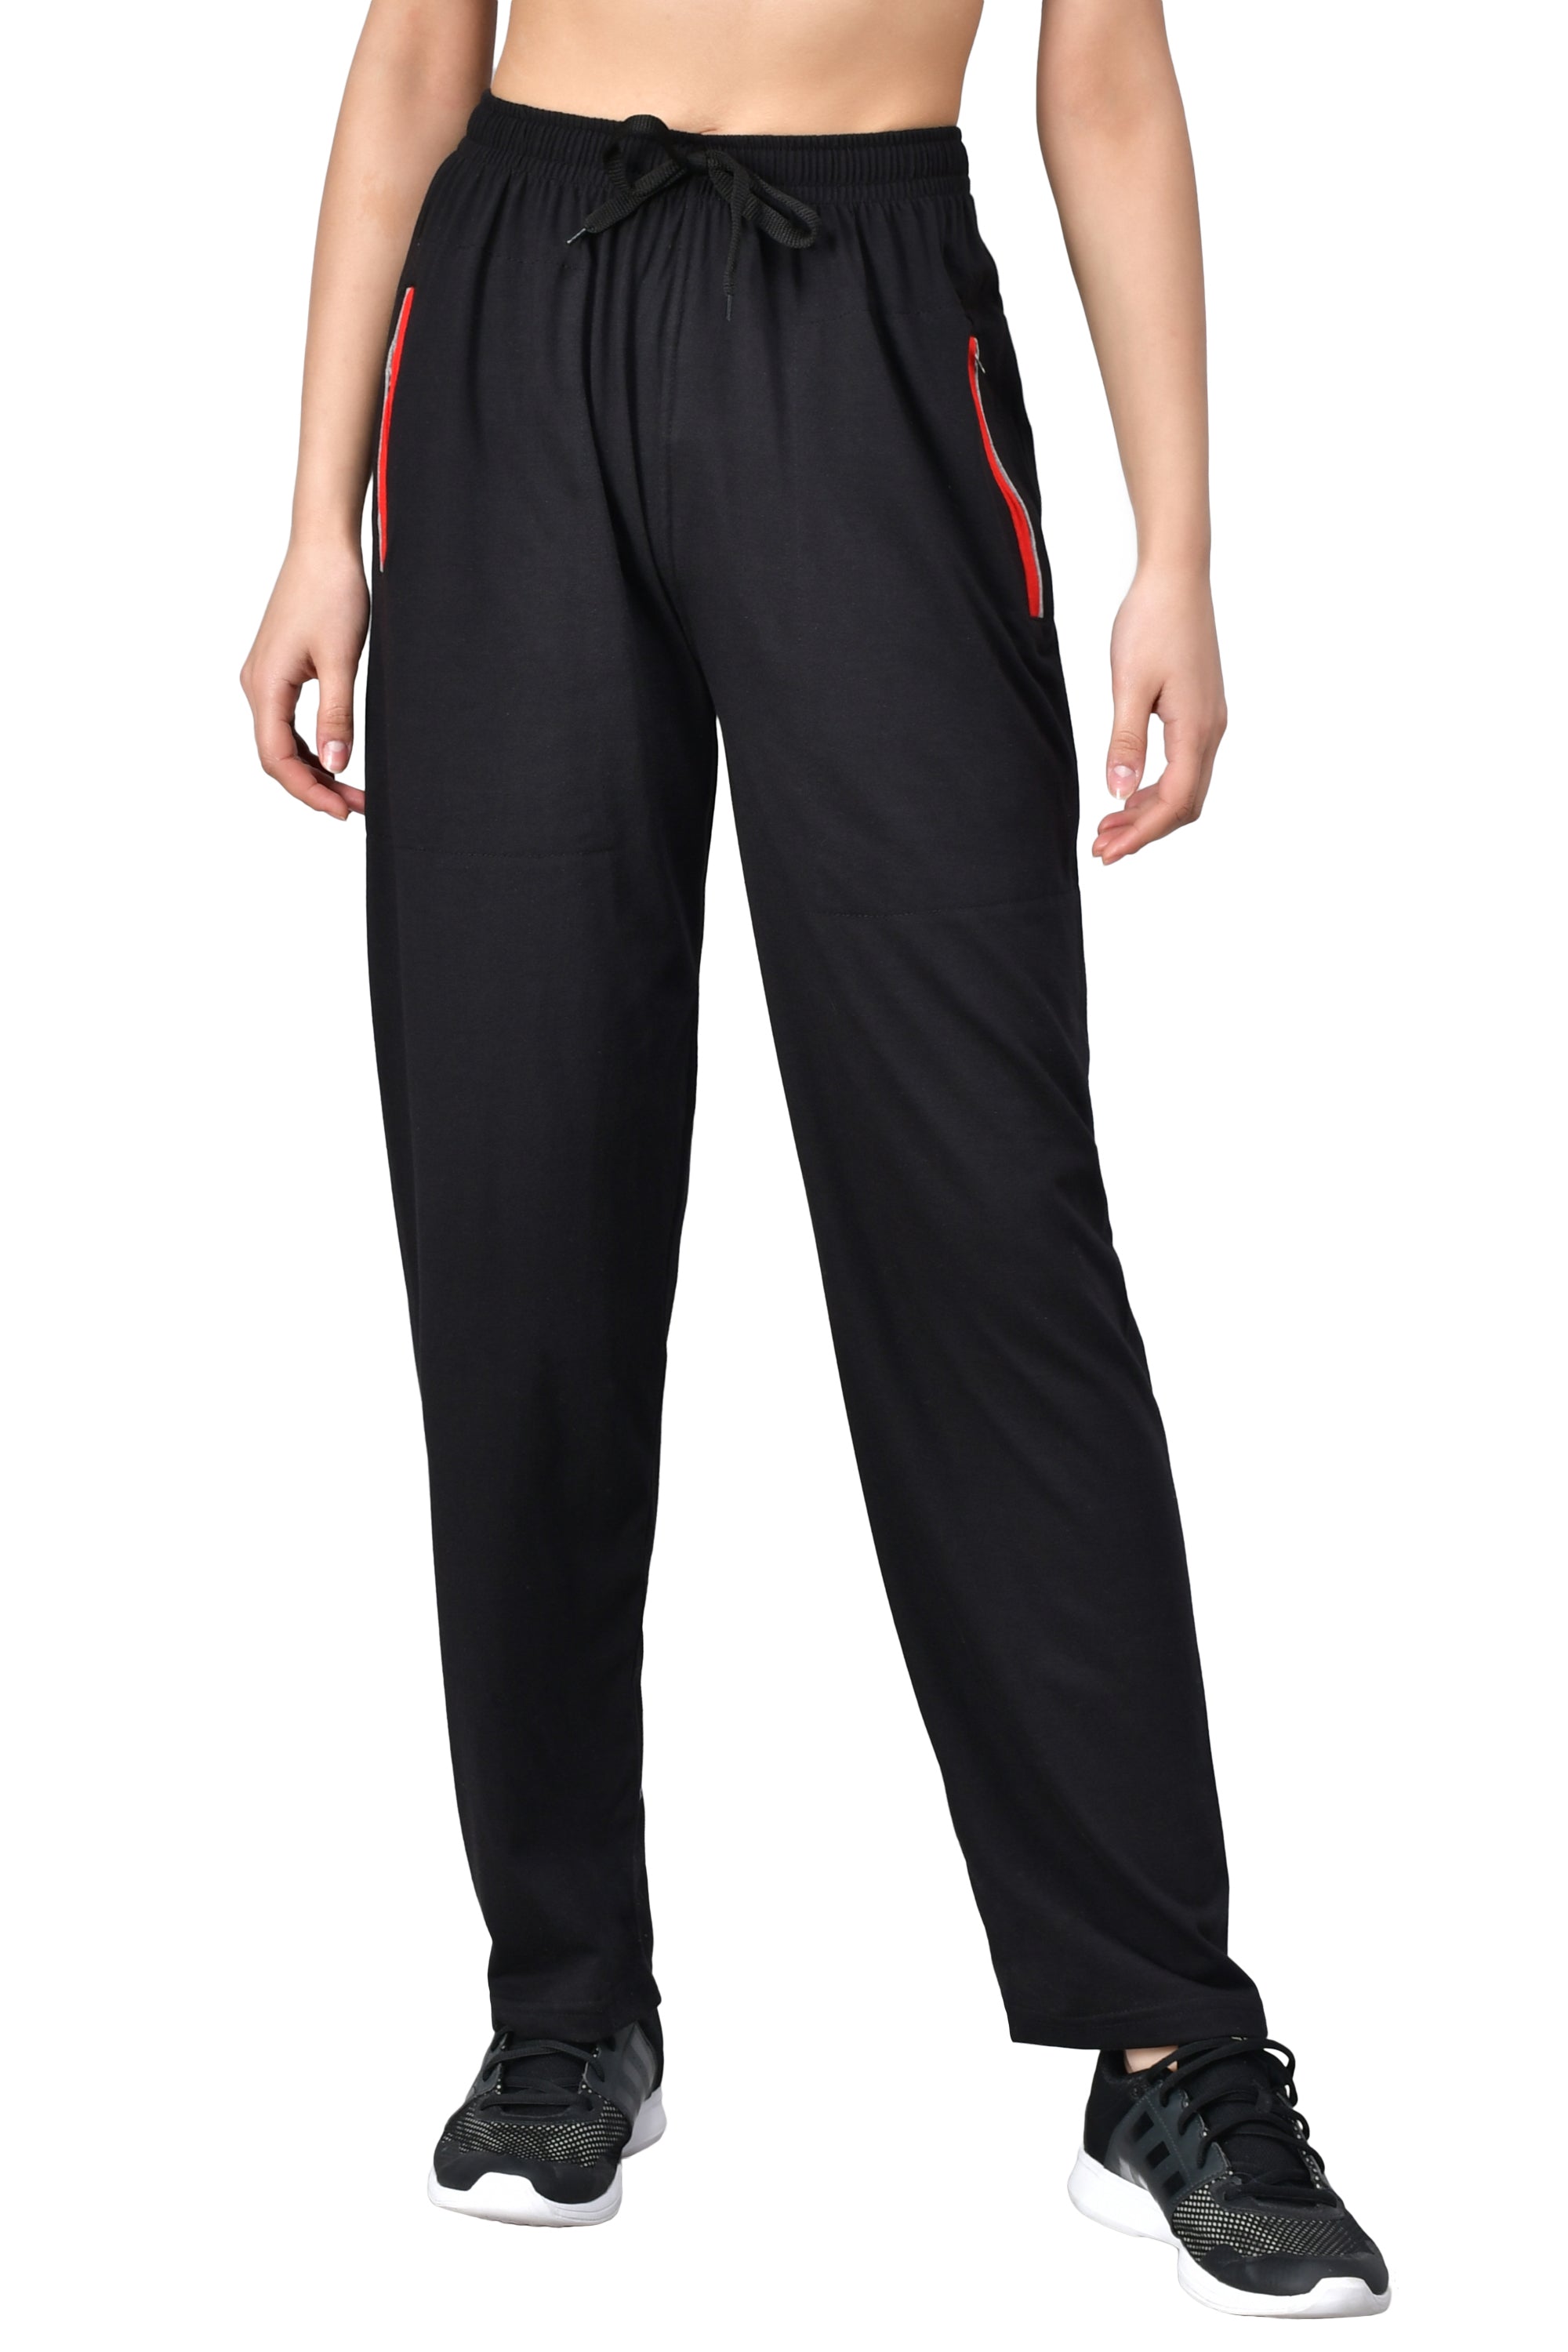 Buy BLACK PANTHER Graphite Mens Regular Fit Track Pants | Shoppers Stop